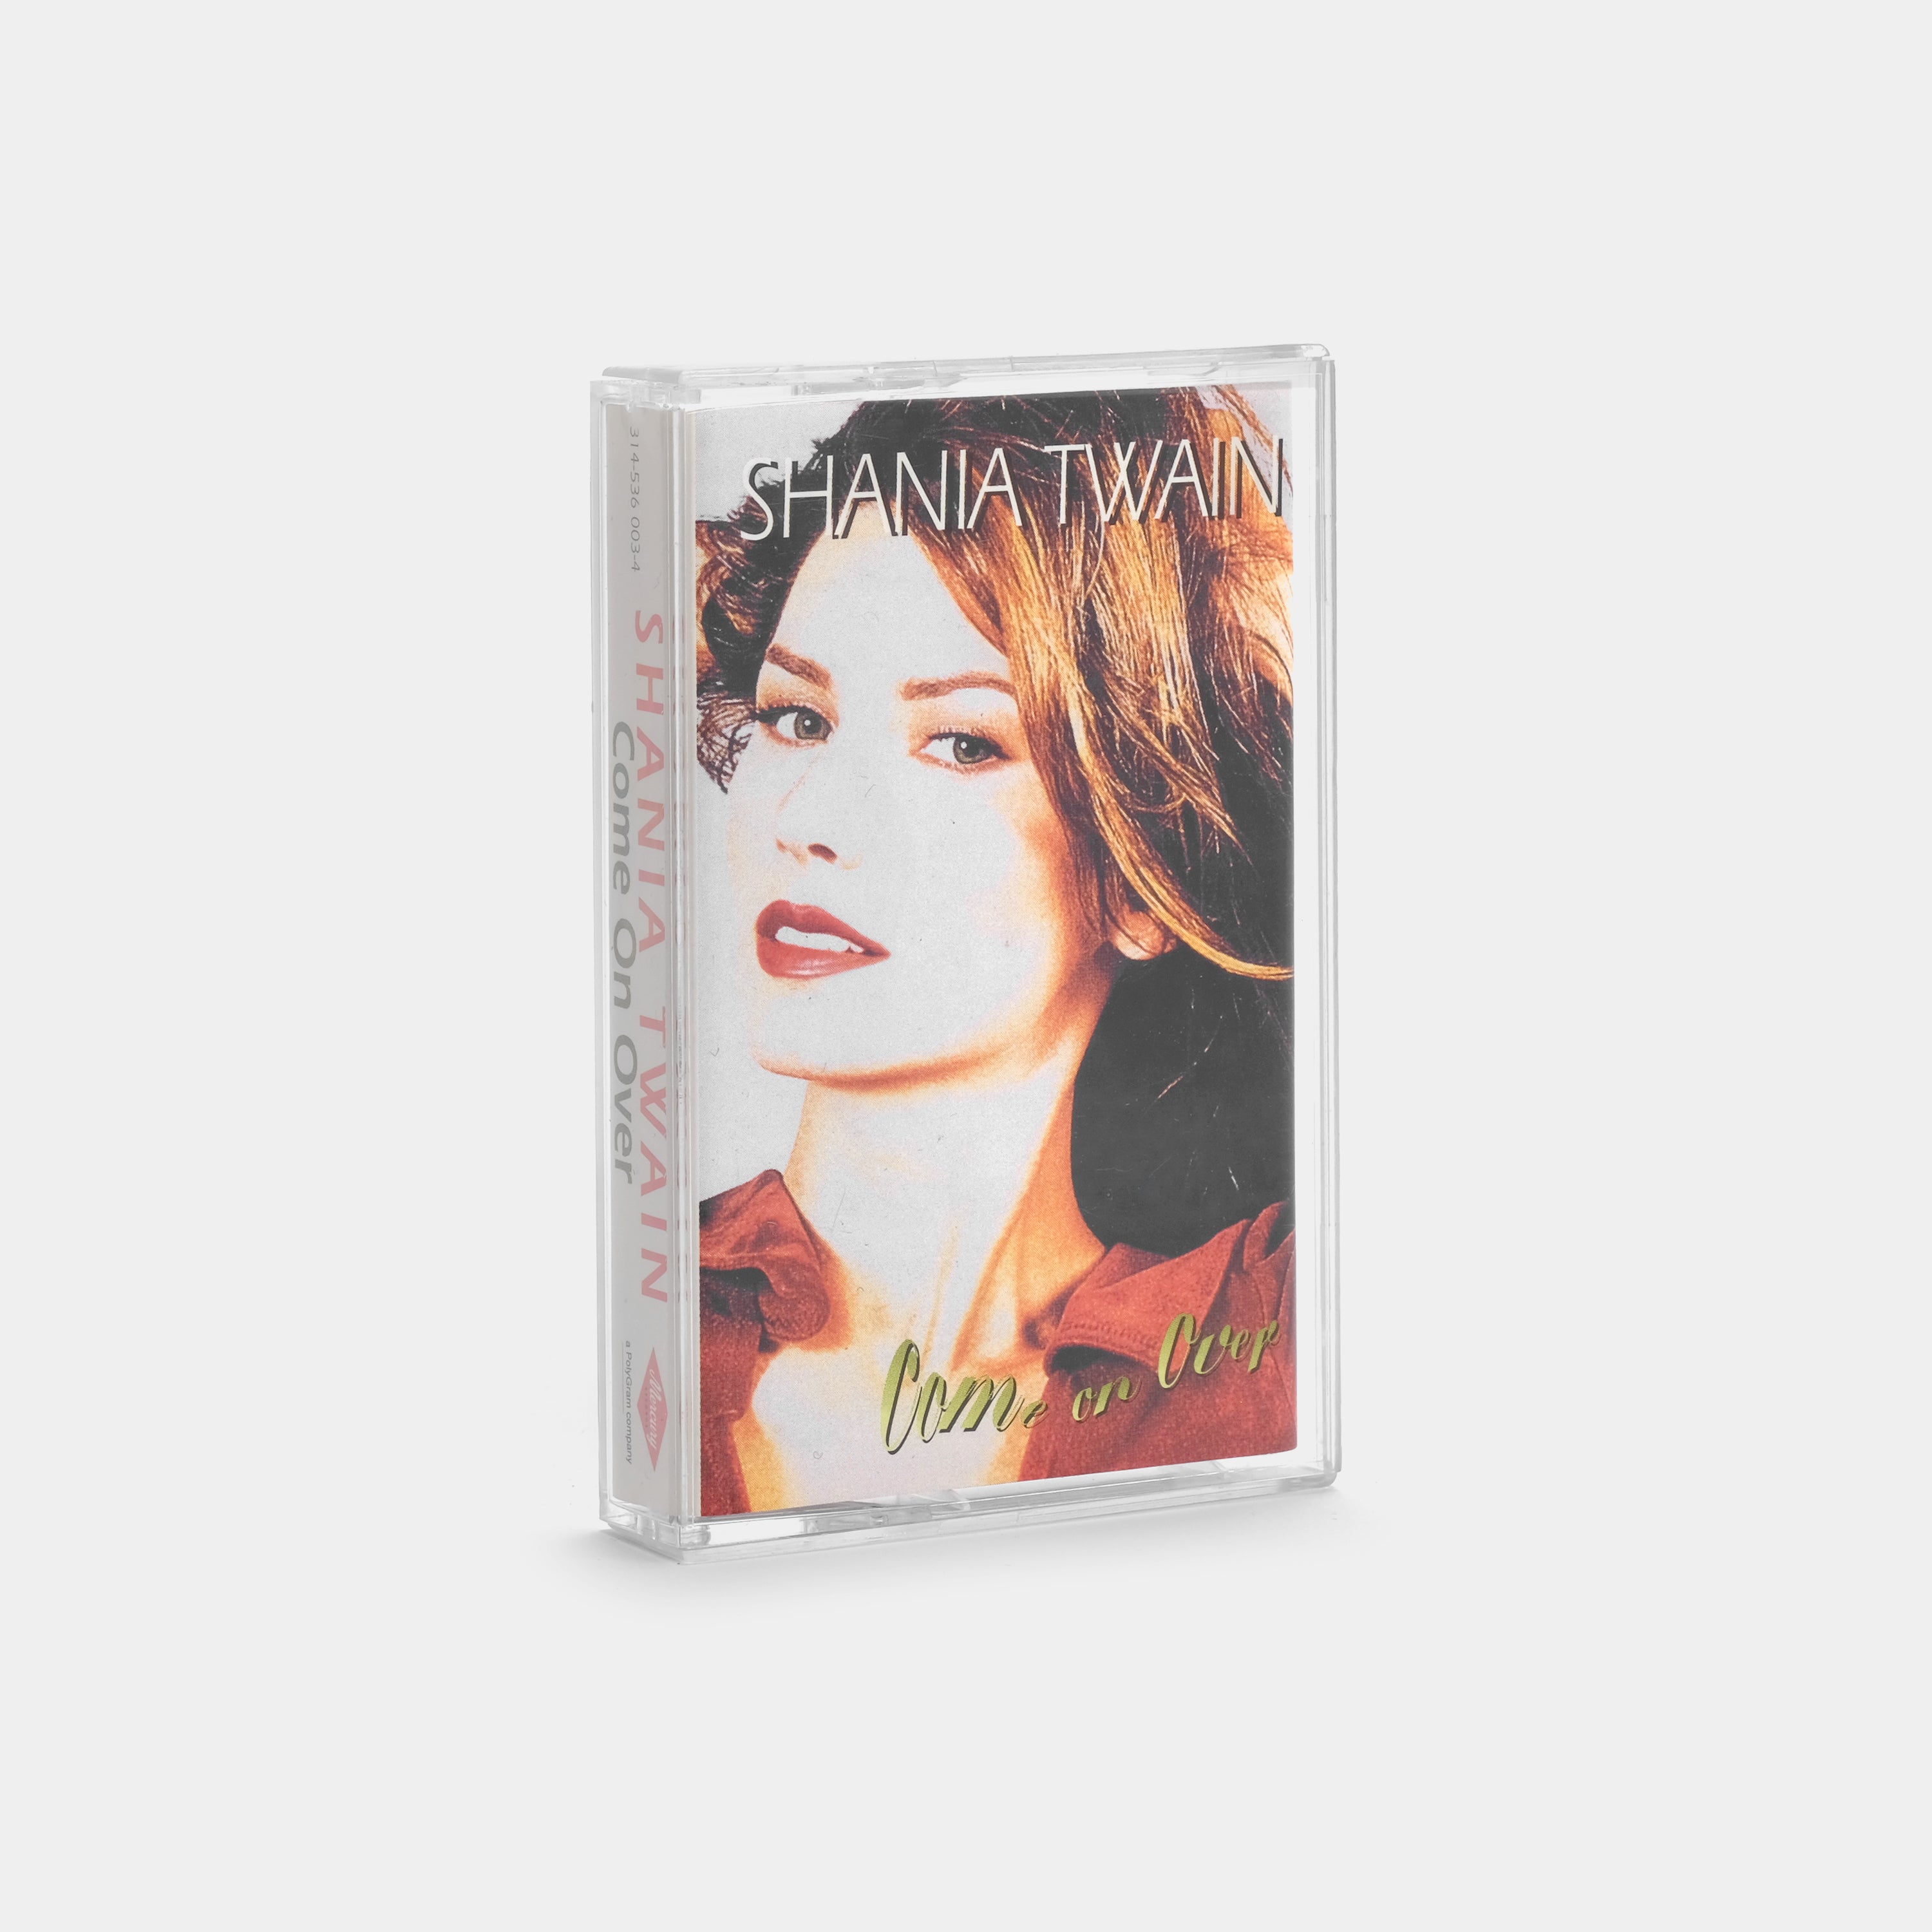 Shania Twain - Come On Over Cassette Tape